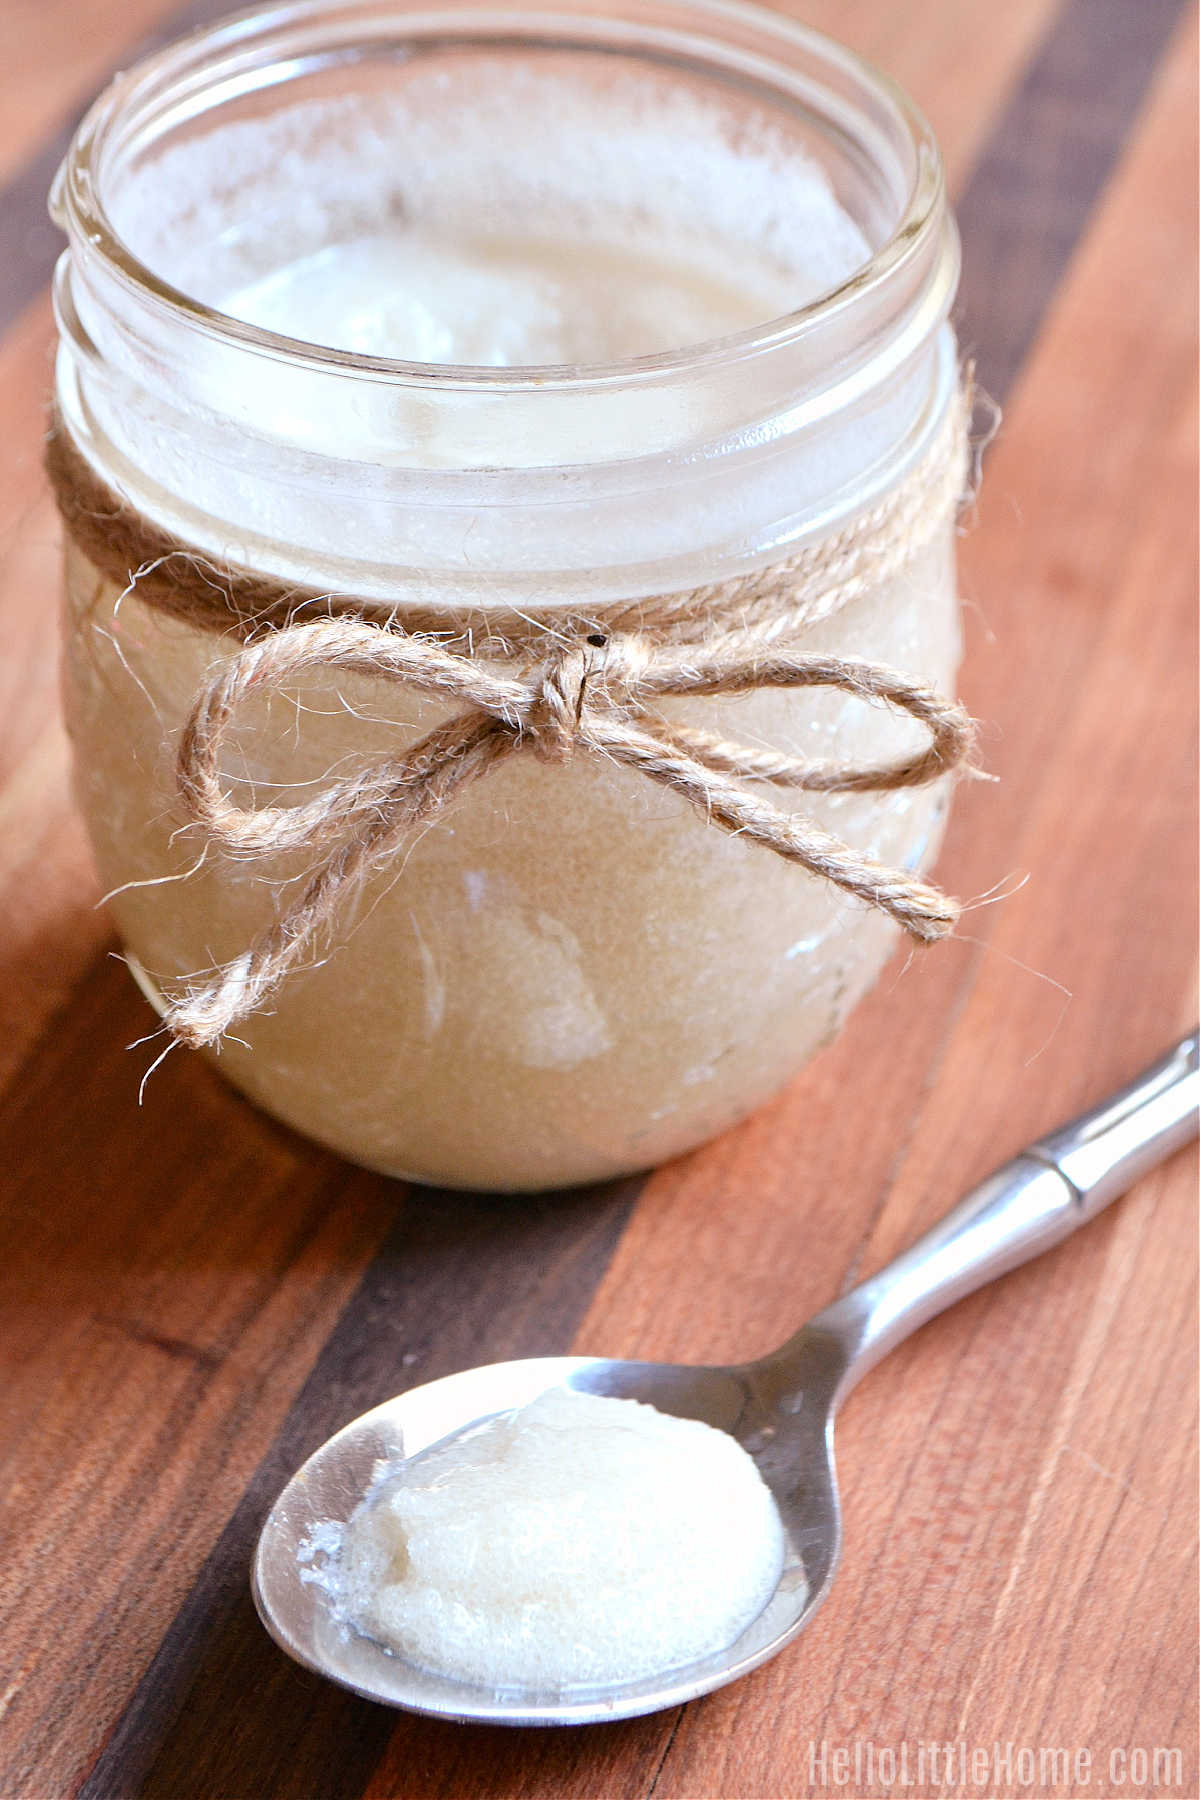 A spoonful of scrub in front of a jar on a wood board.